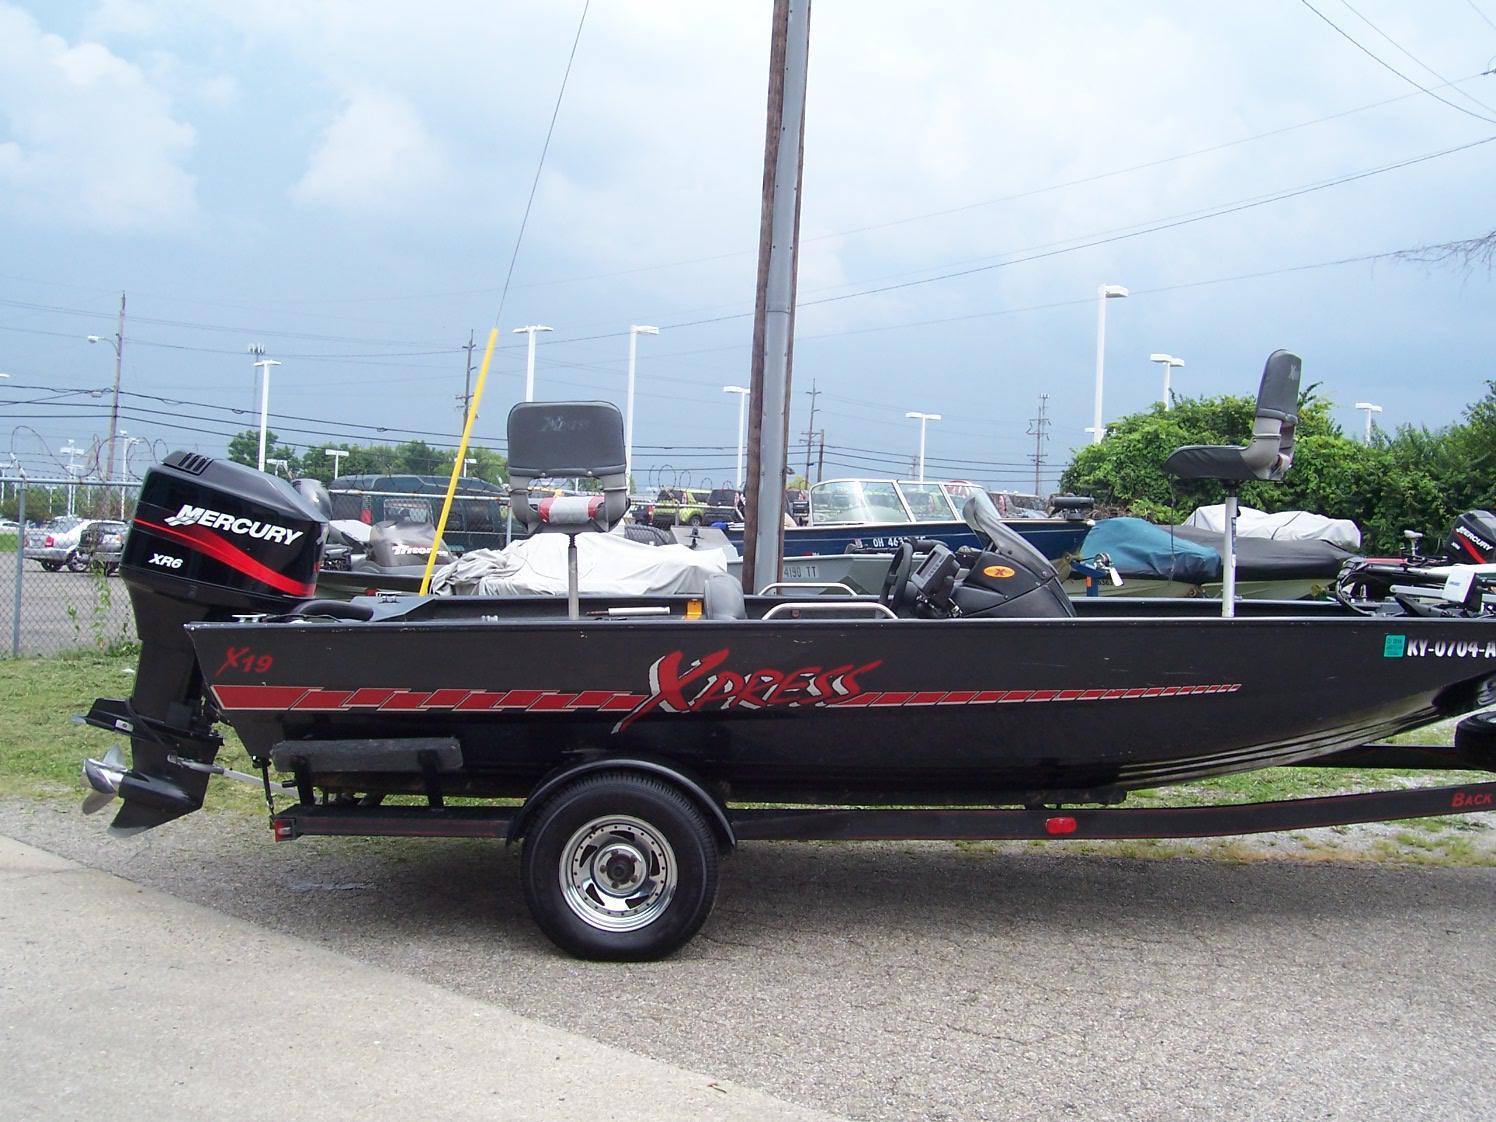 Bass Boat For Sale: Xpress Bass Boat For Sale Craigslist.